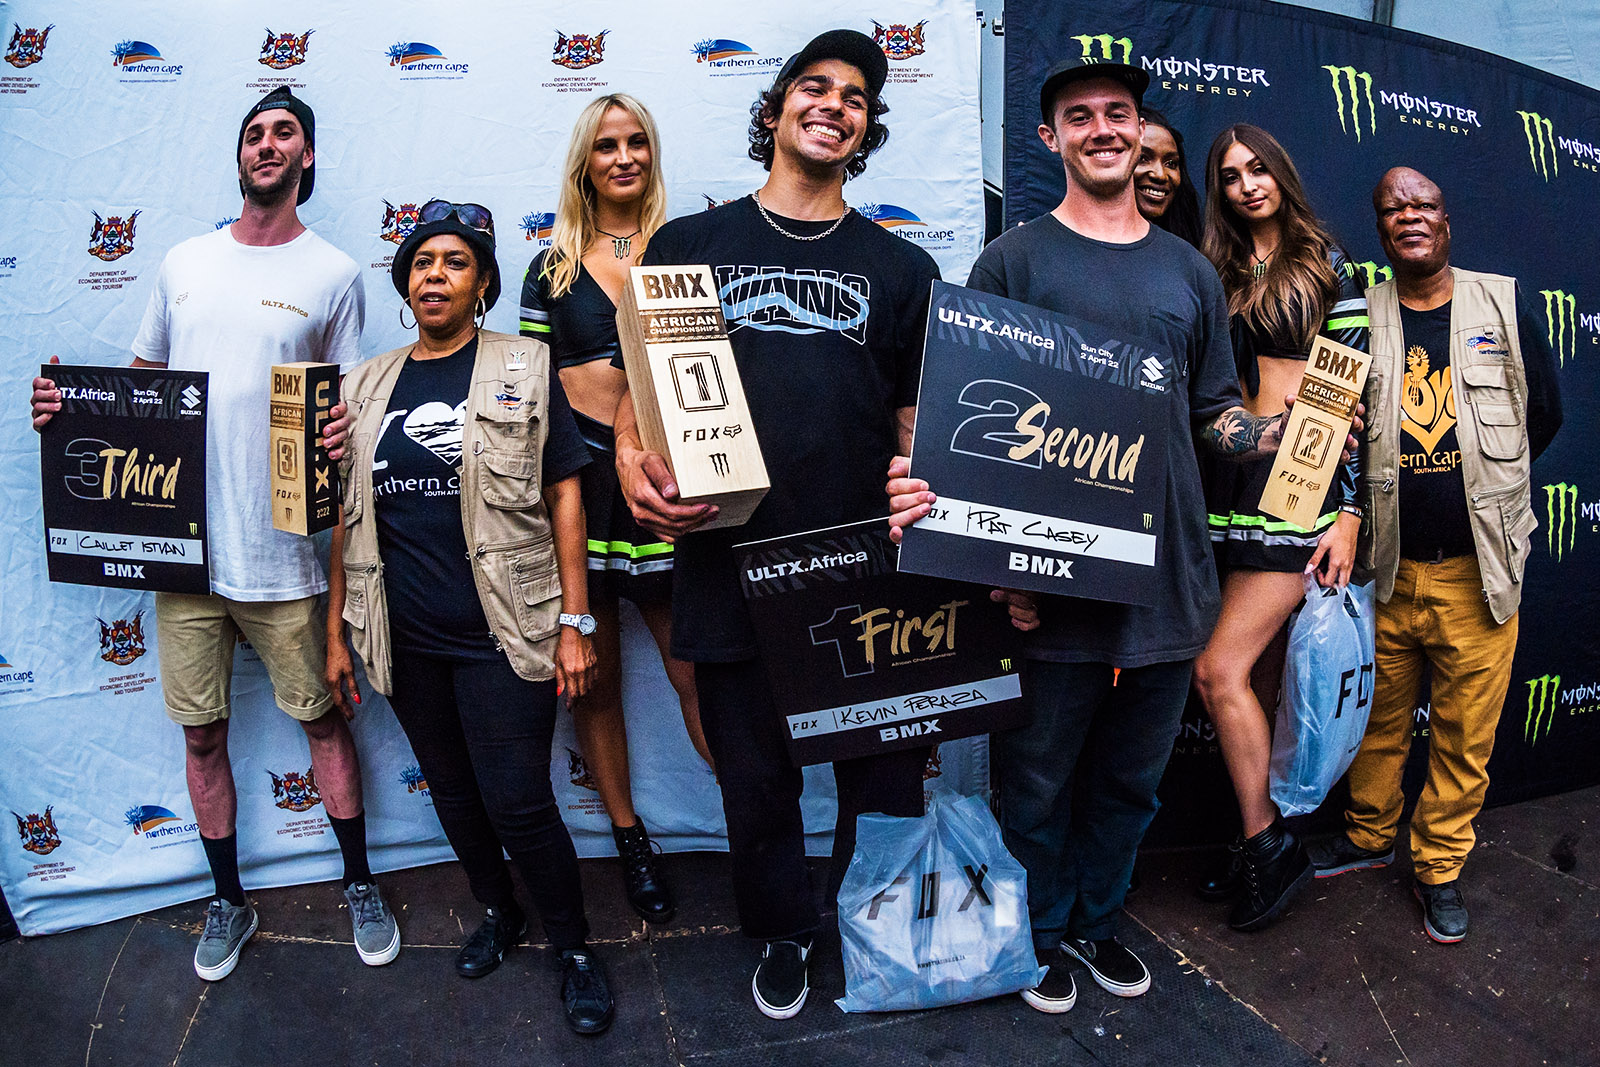 Monster Energy’s Kevin Peraza Takes First Place and teammate Pat Casey Takes Second Place in ULT.X BMX Championship in South Africa